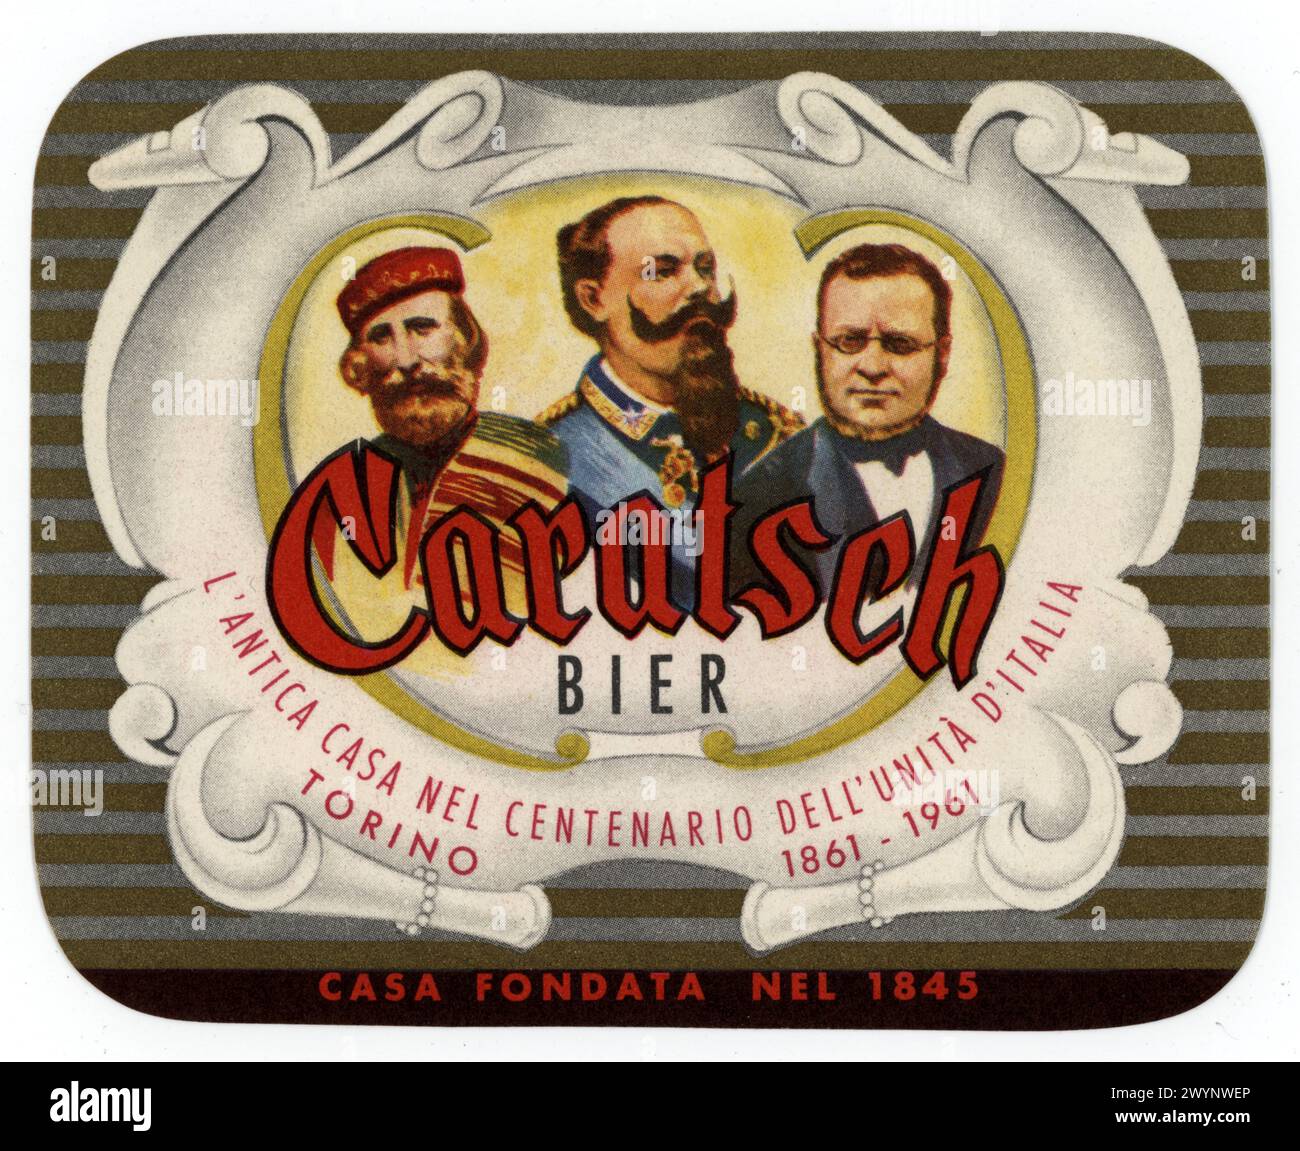 1961 , TORINO , PIEMONTE ,  ITALY : The italian CARATSCH BIER , founded in Turin , 1845 . Bottle label for BIRRA bottles specially produced for the Centenary of the Unification of Italy ( Unità d'ITALIA , 1861 - 1961) with the portraits of general GIUSEPPE GARIBALDI , King VITTORIO EMANUELE II of SAVOIA and Count CAMILLO BENSO DI CAVOUR . Bosio & Caratsch is the oldest Italian brewery . After several decades of activity and recognition , in 1937 the company was purchased by the Luciani Group , already owner of the Pedavena brand, as well as the Italian dealer of Dreher and Heineken .It ceased Stock Photo